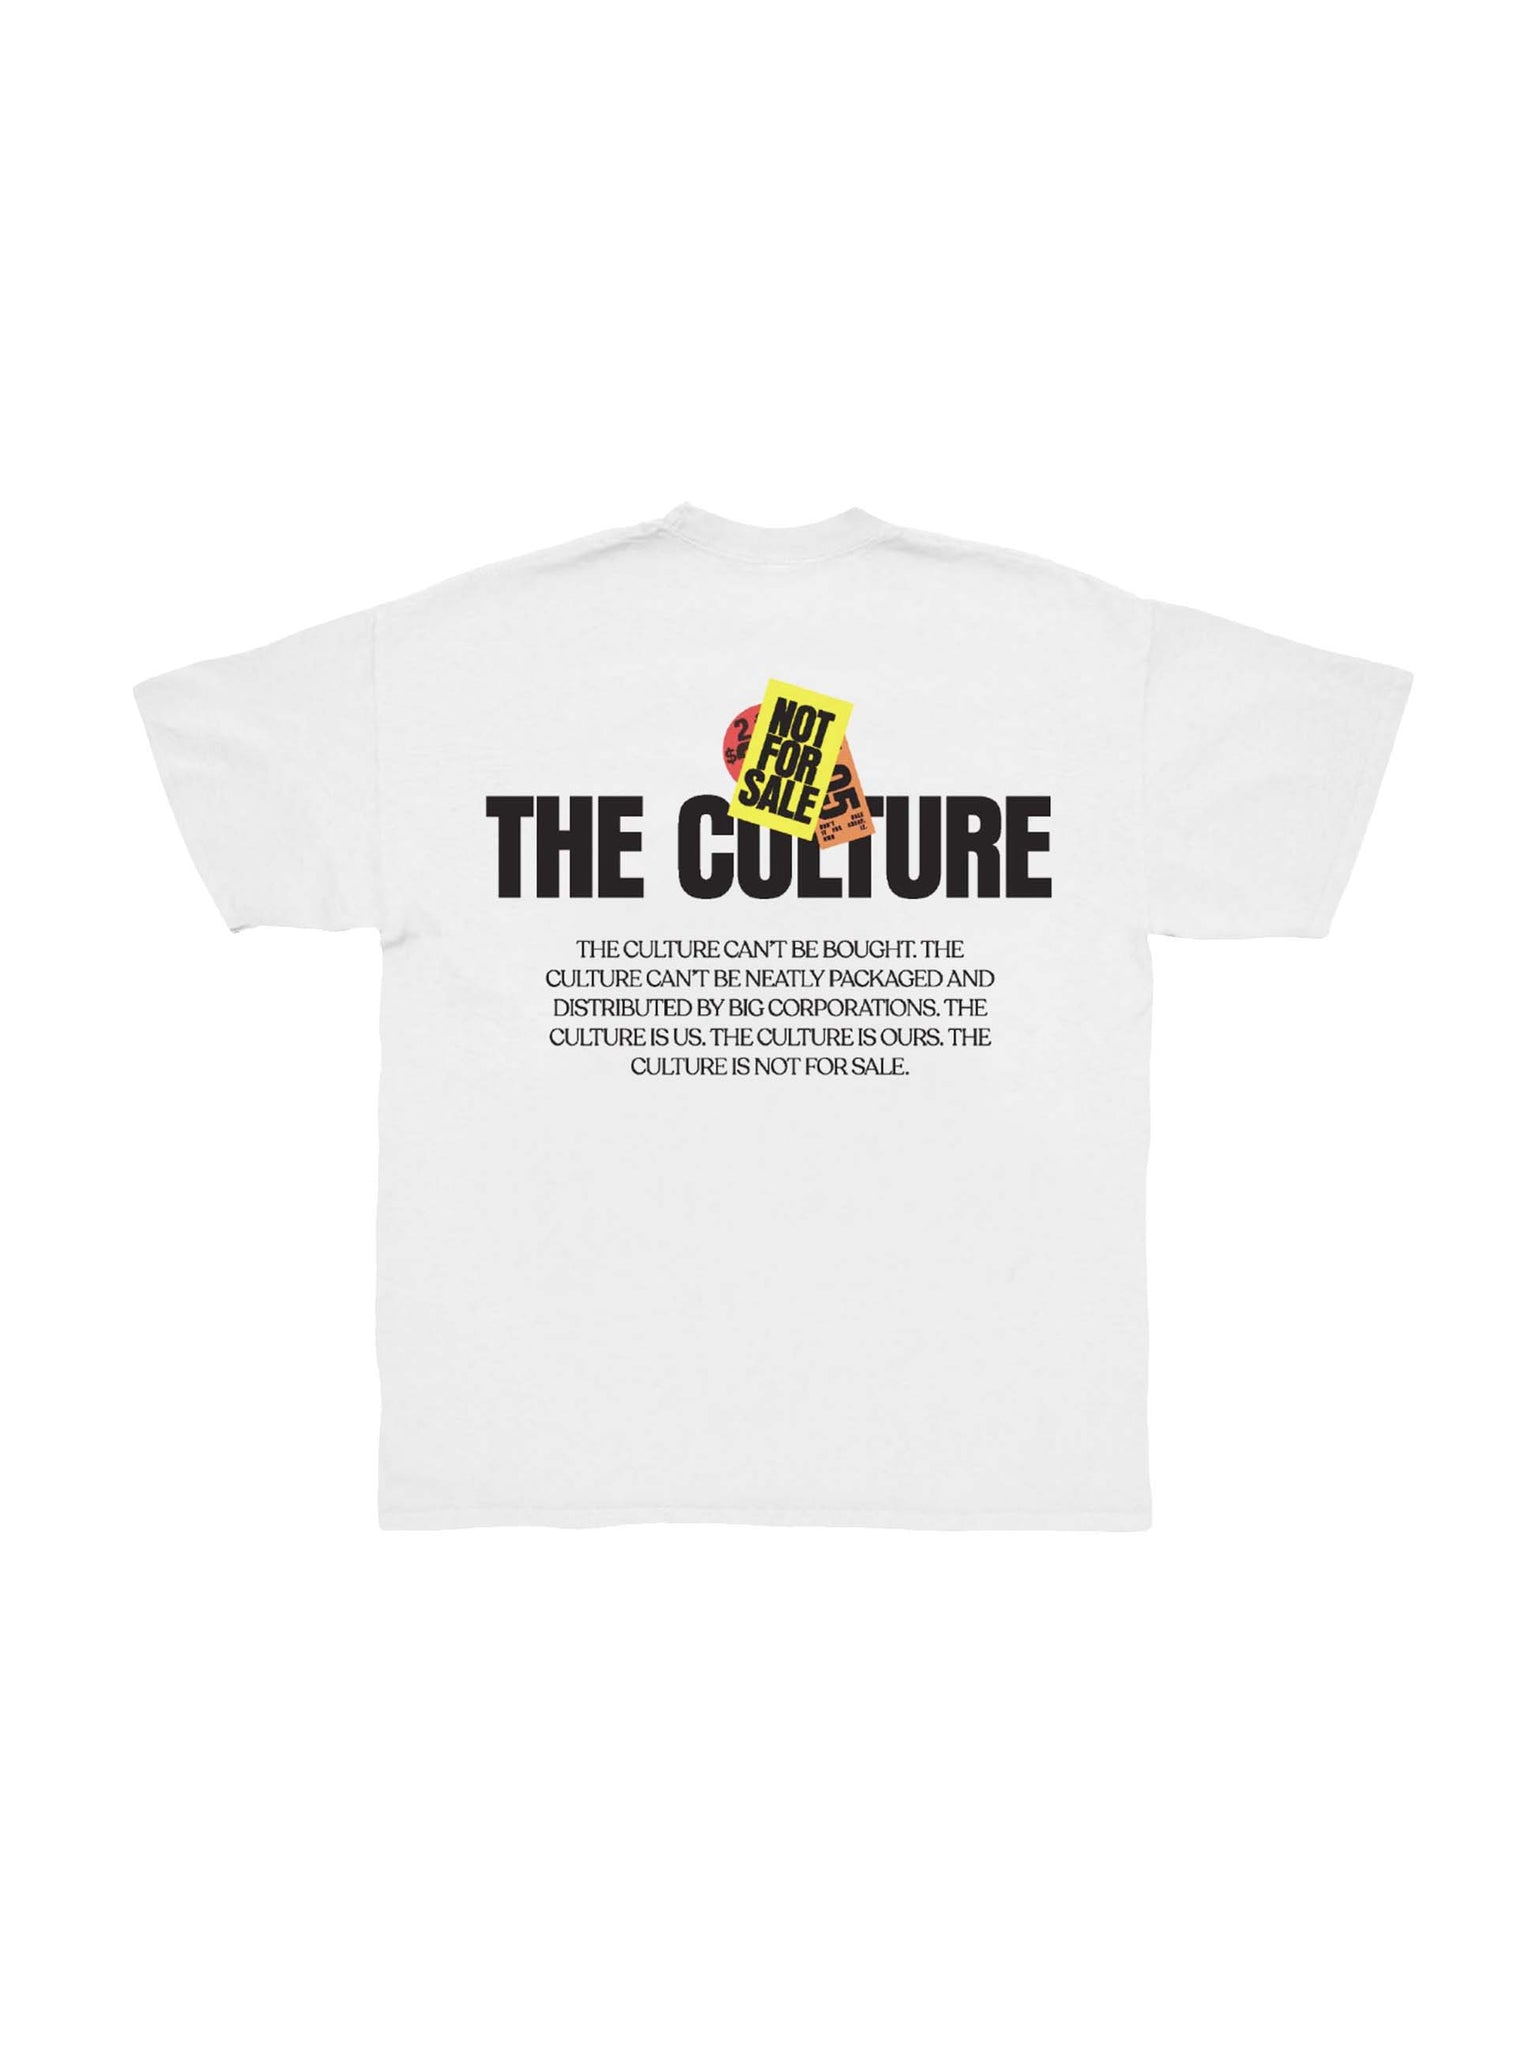 The culture is not for sale (FROM THE ARCHIVES)